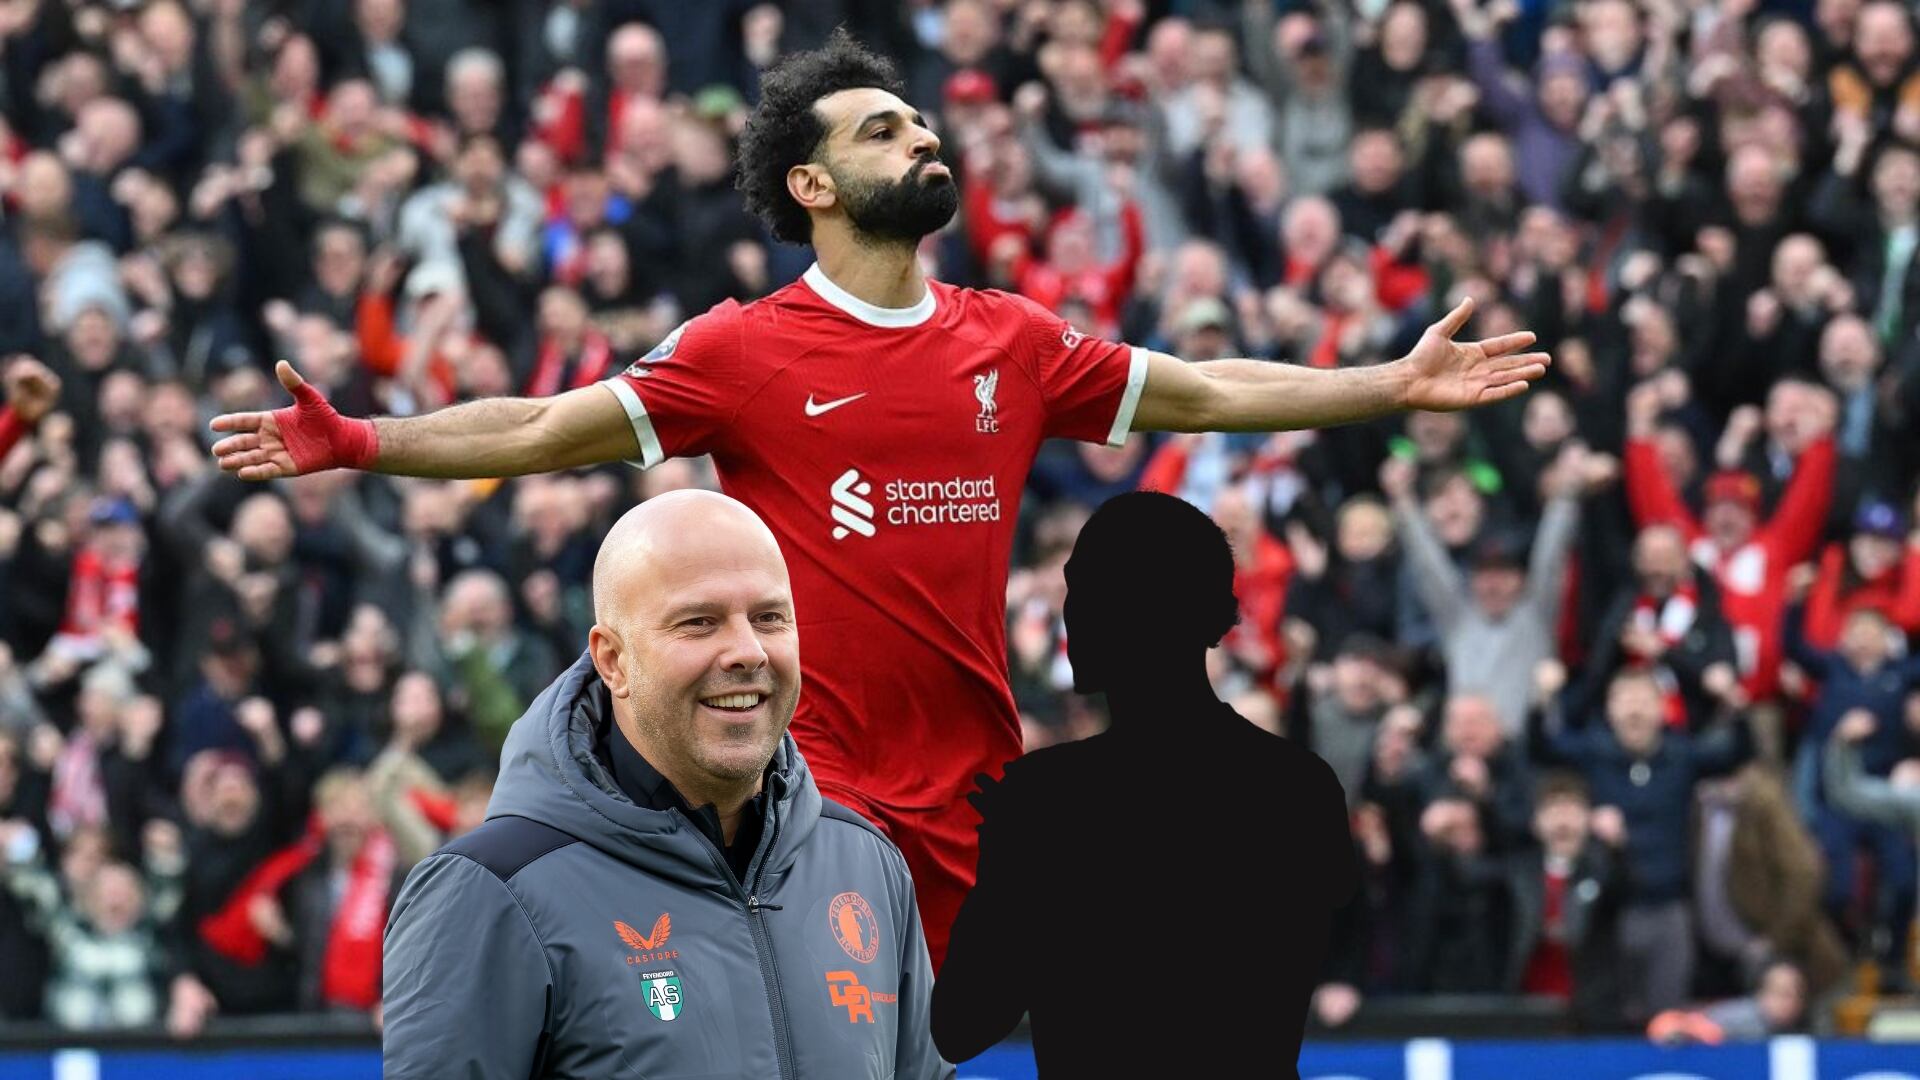 Not even Salah, it was Arne Slot's first demand at Liverpool and the untouchable player in the sqaud